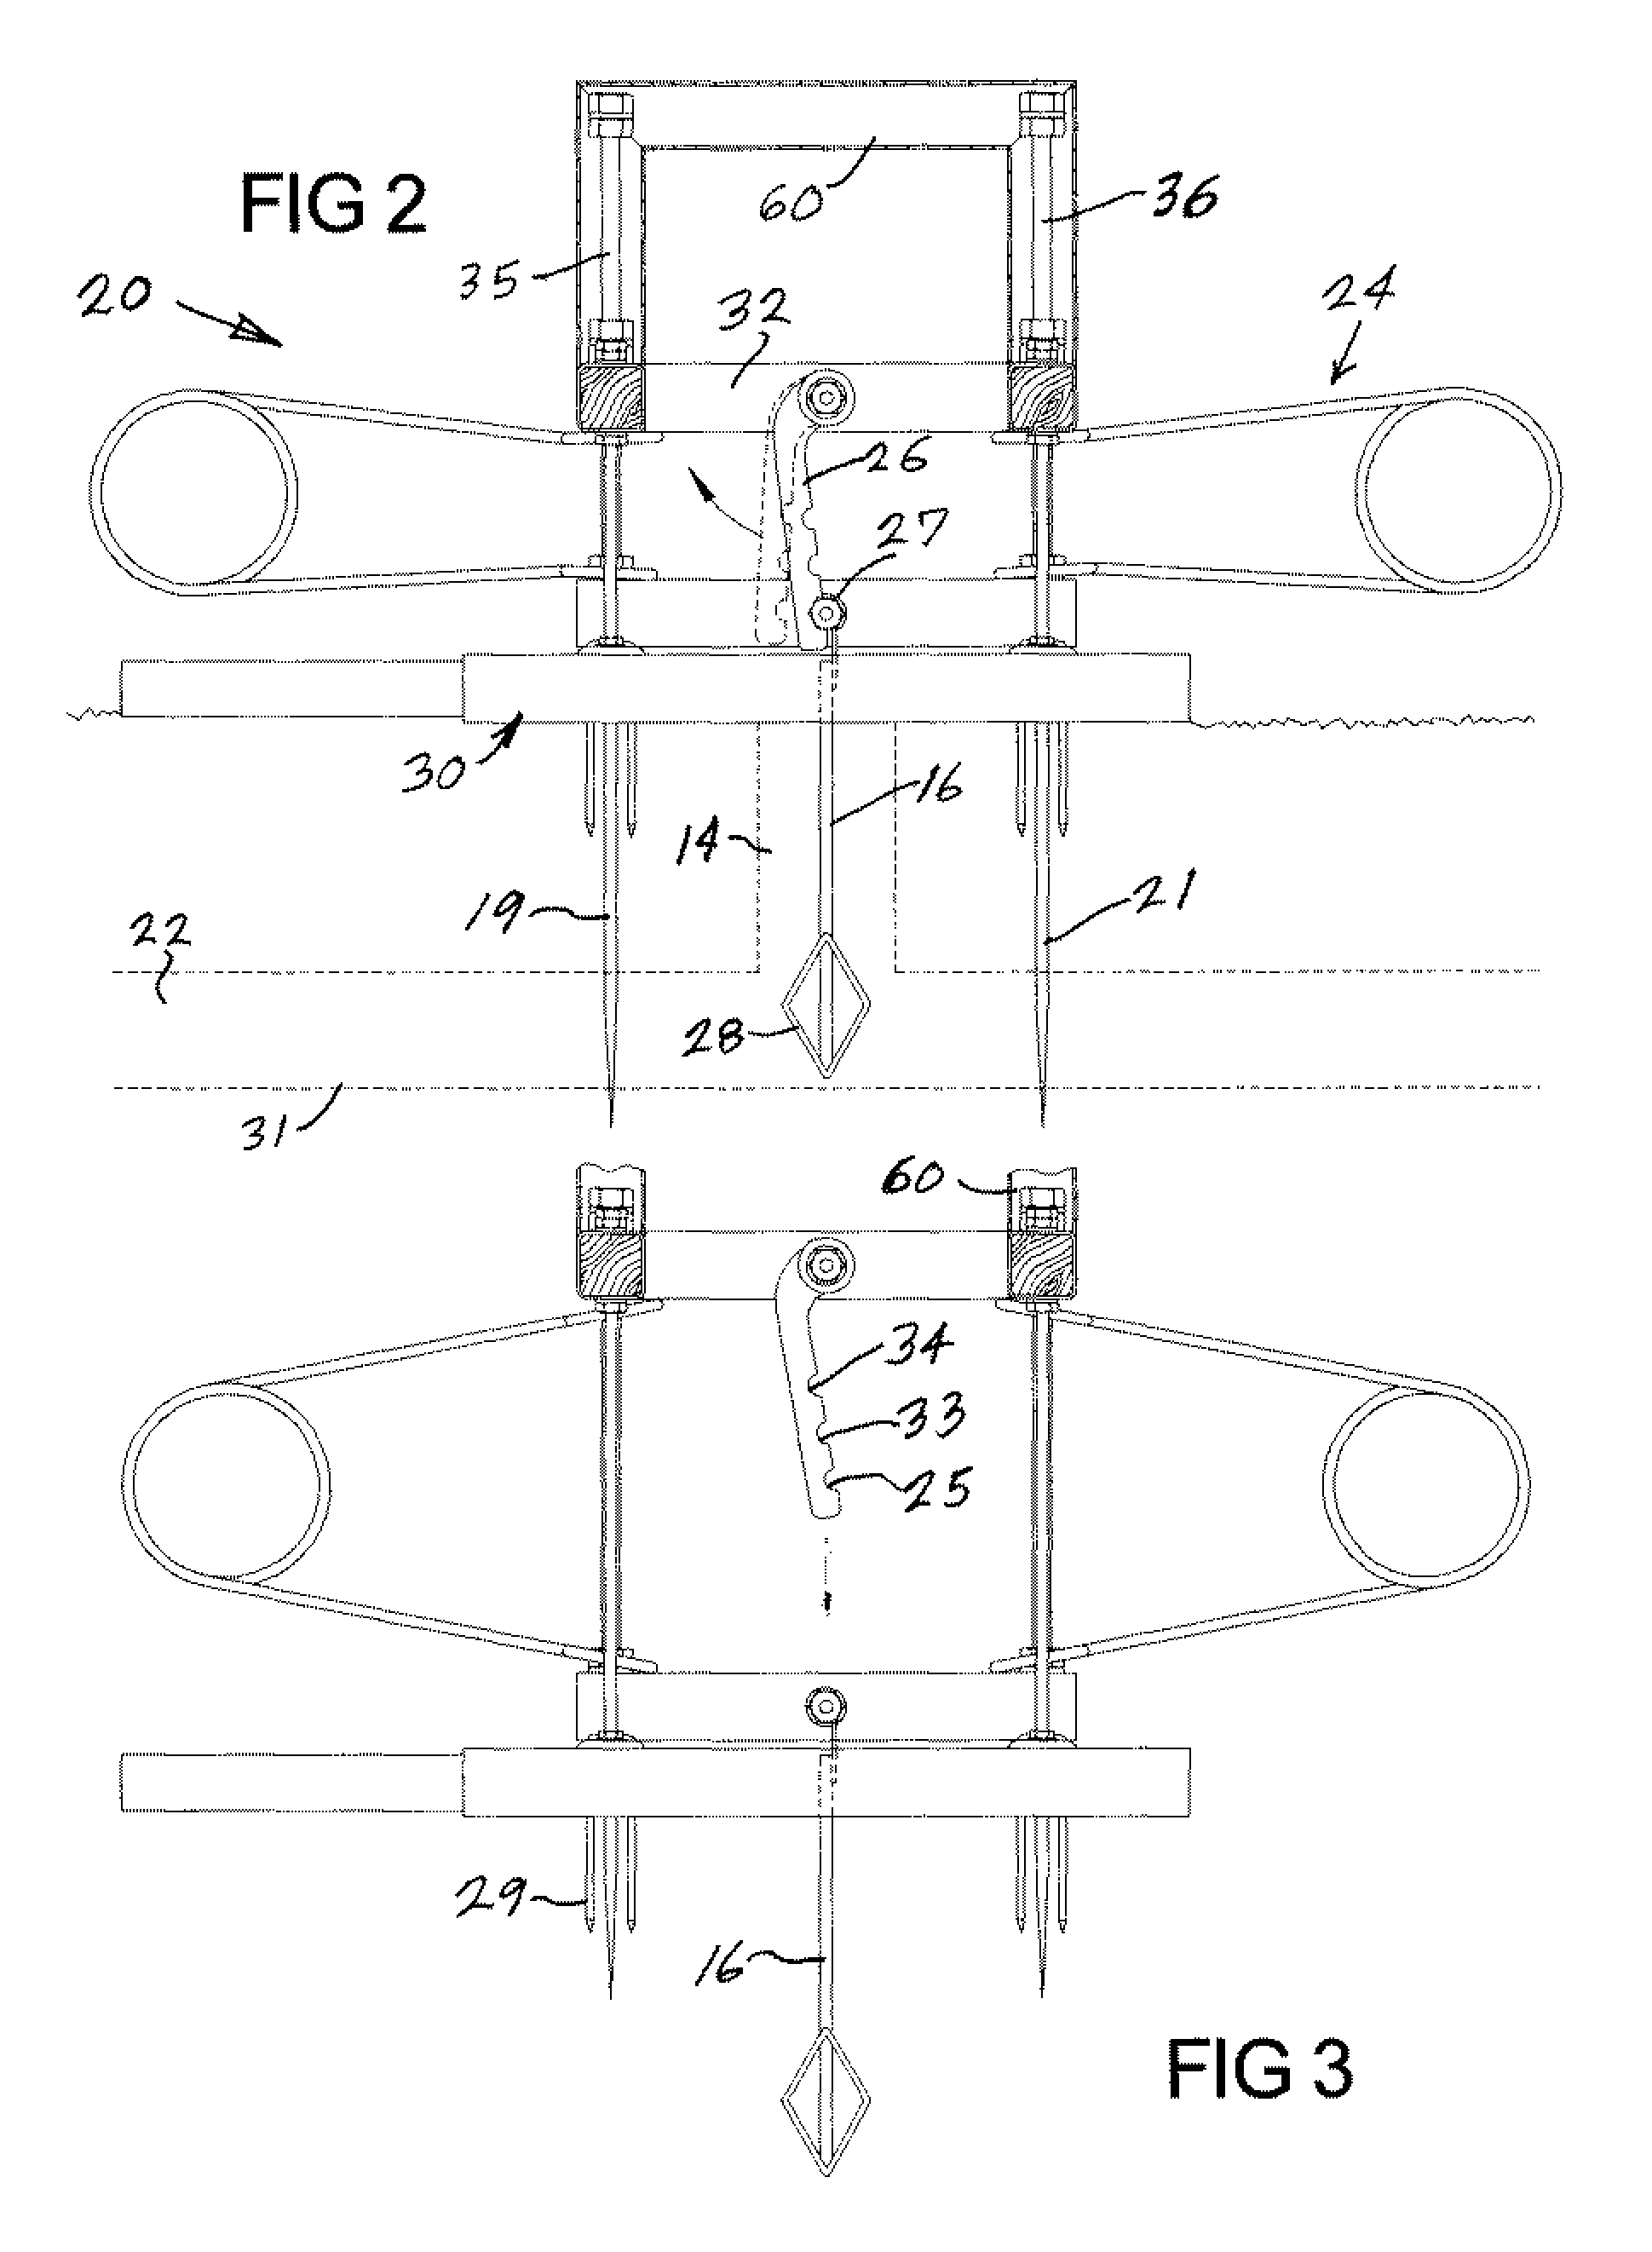 Mole trapping system, mole trap and trap-setting assistance device, and methods of constructing and utilizing same